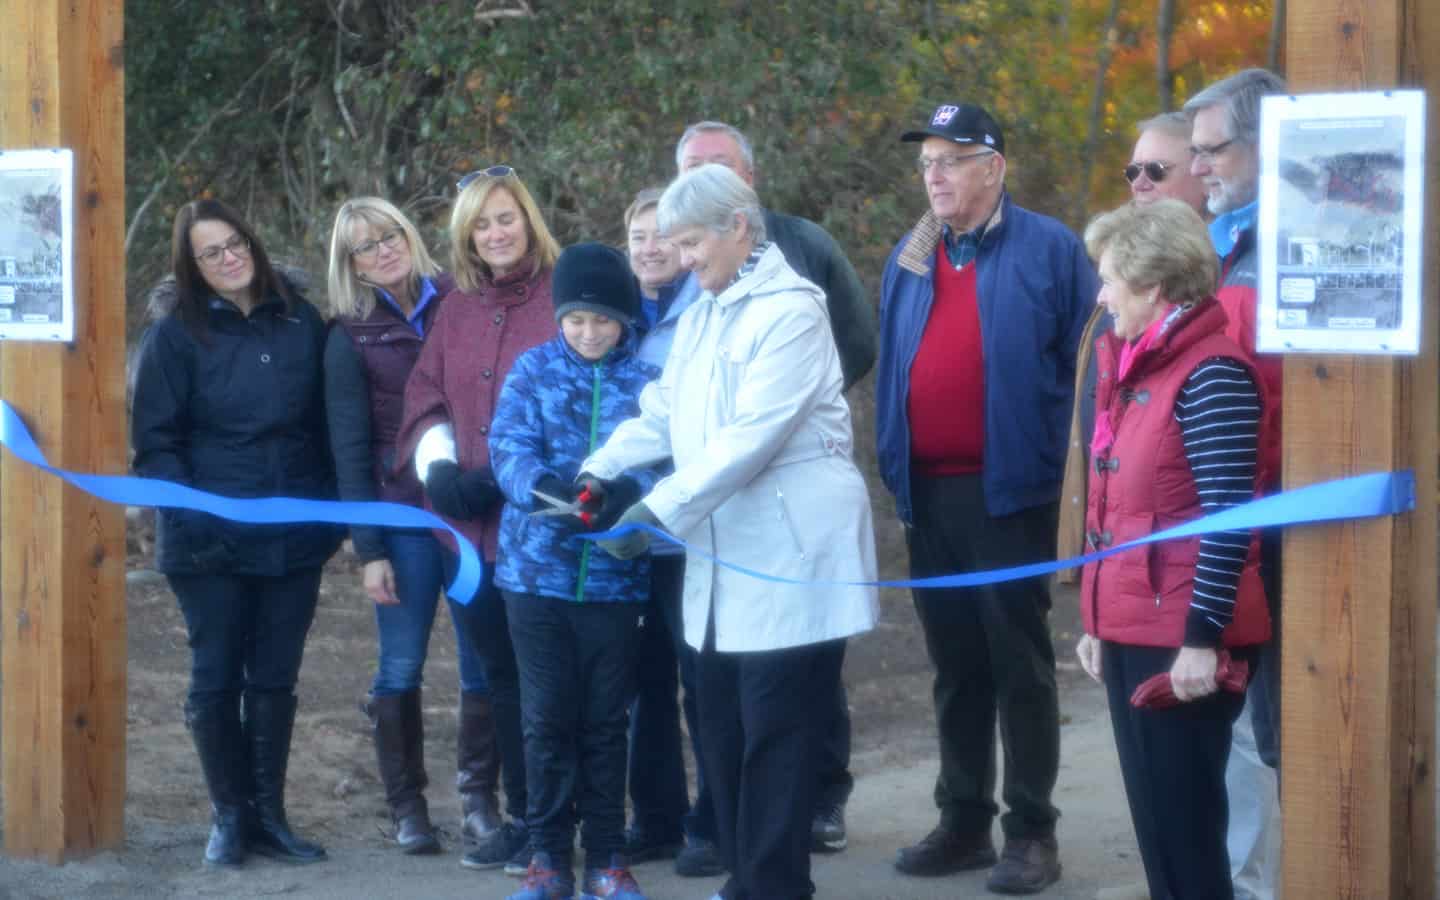 Wellesley celebrates opening of new Wellesley trail named for Erb family